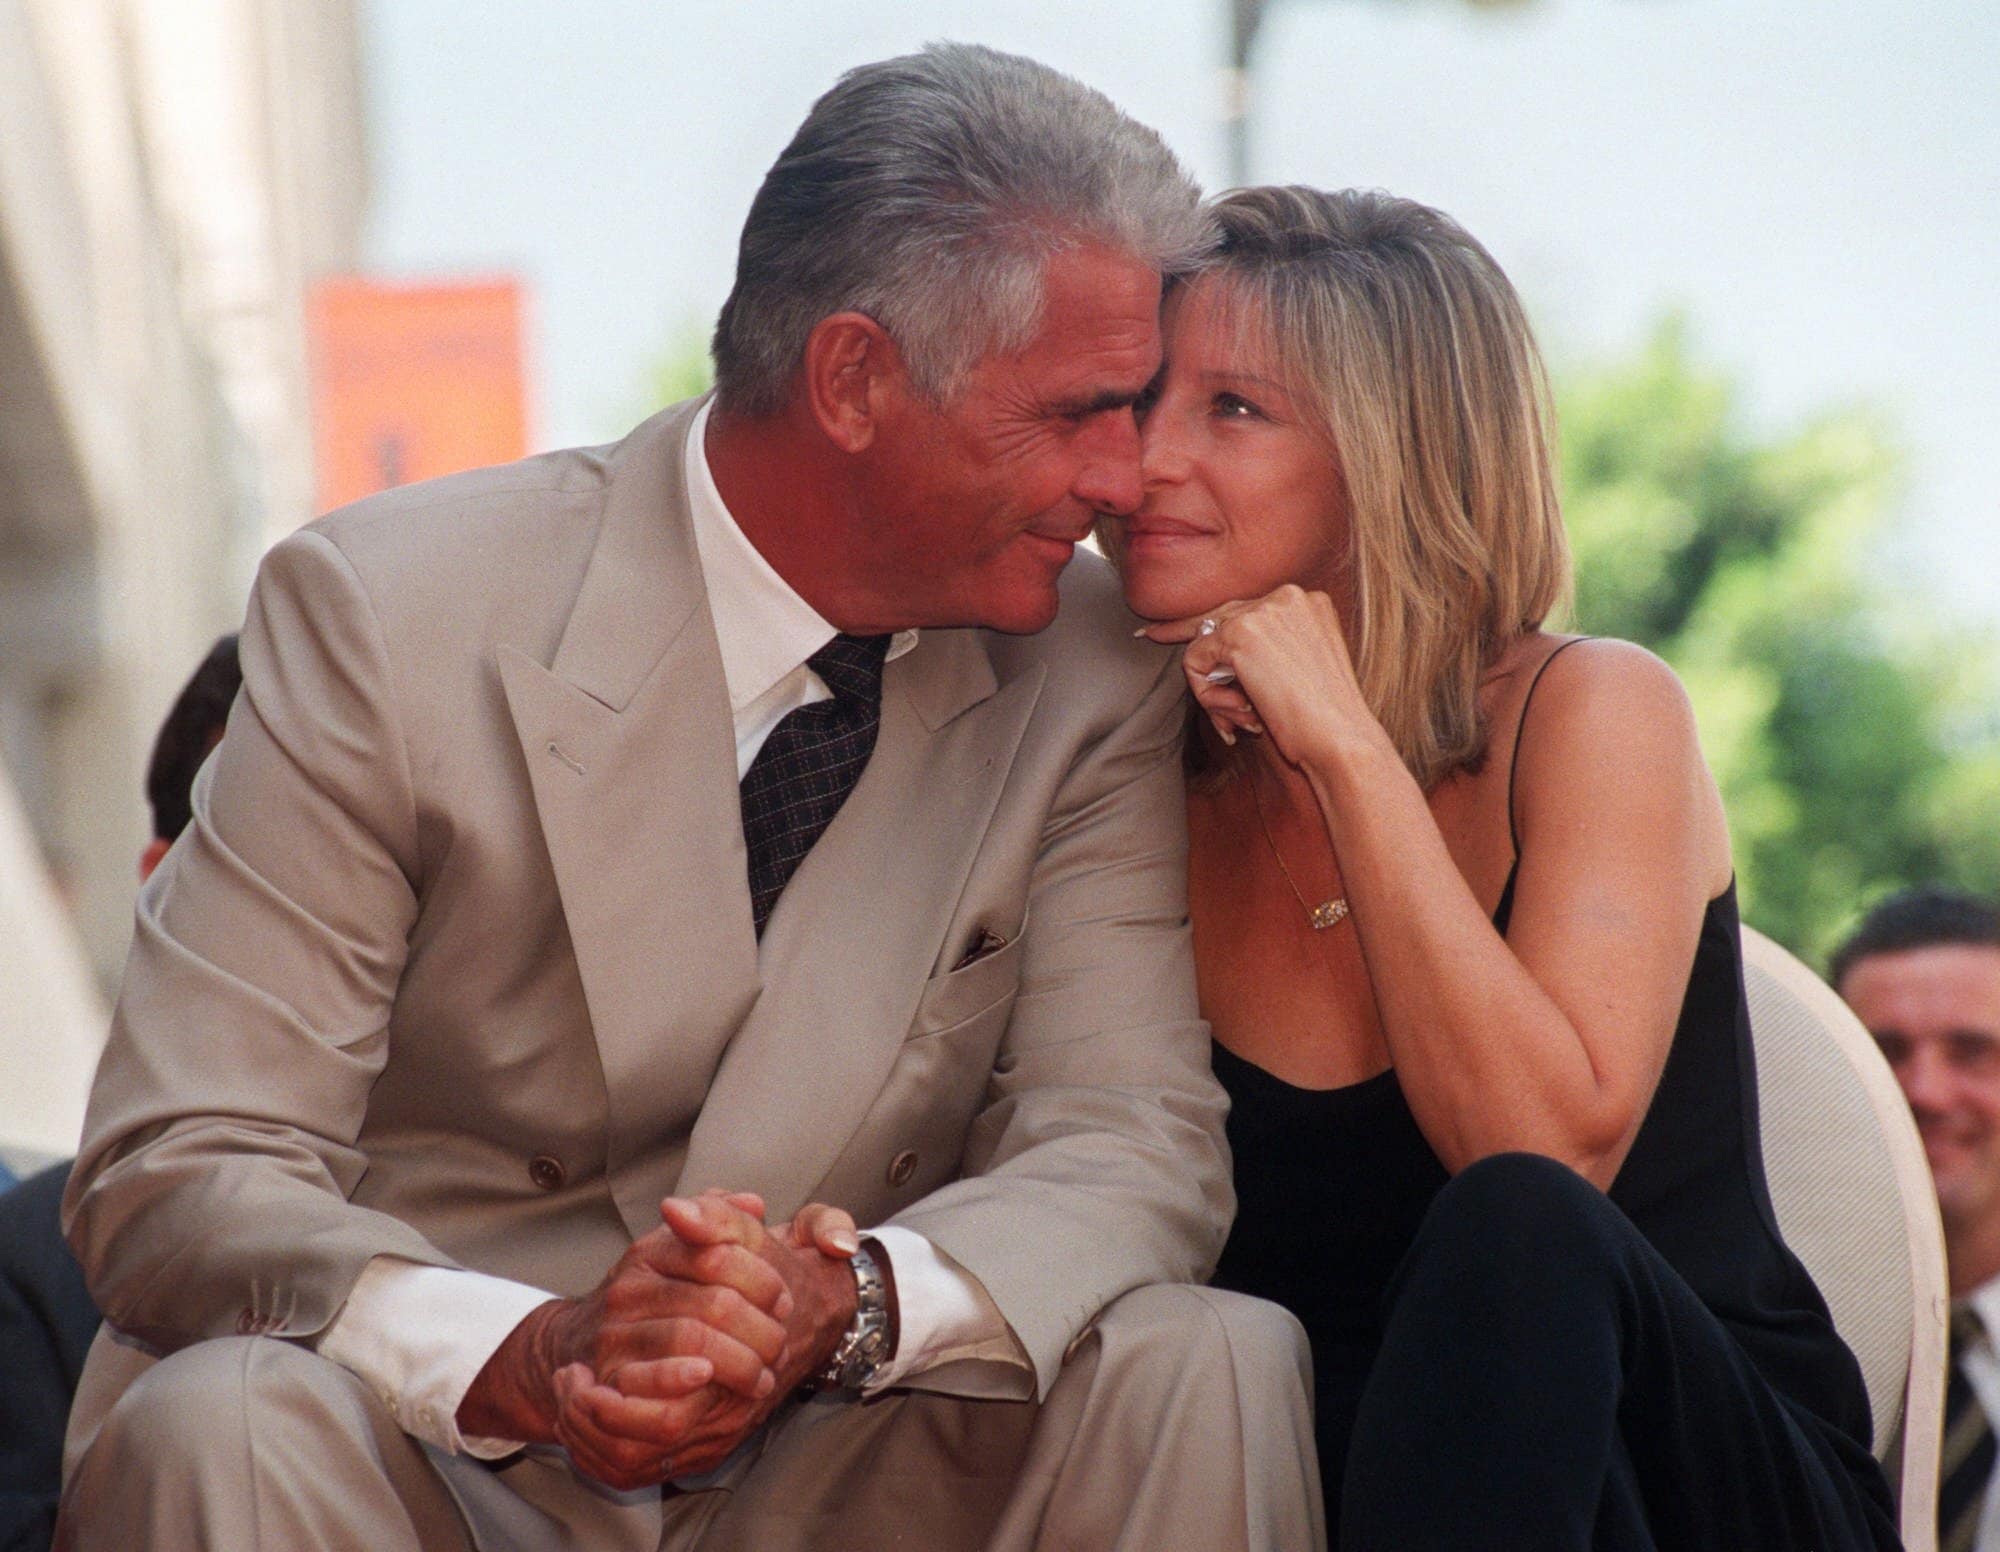 Barbra Streisand and James Brolin Celebrate 26 Years of Marriage with Wedding Photo